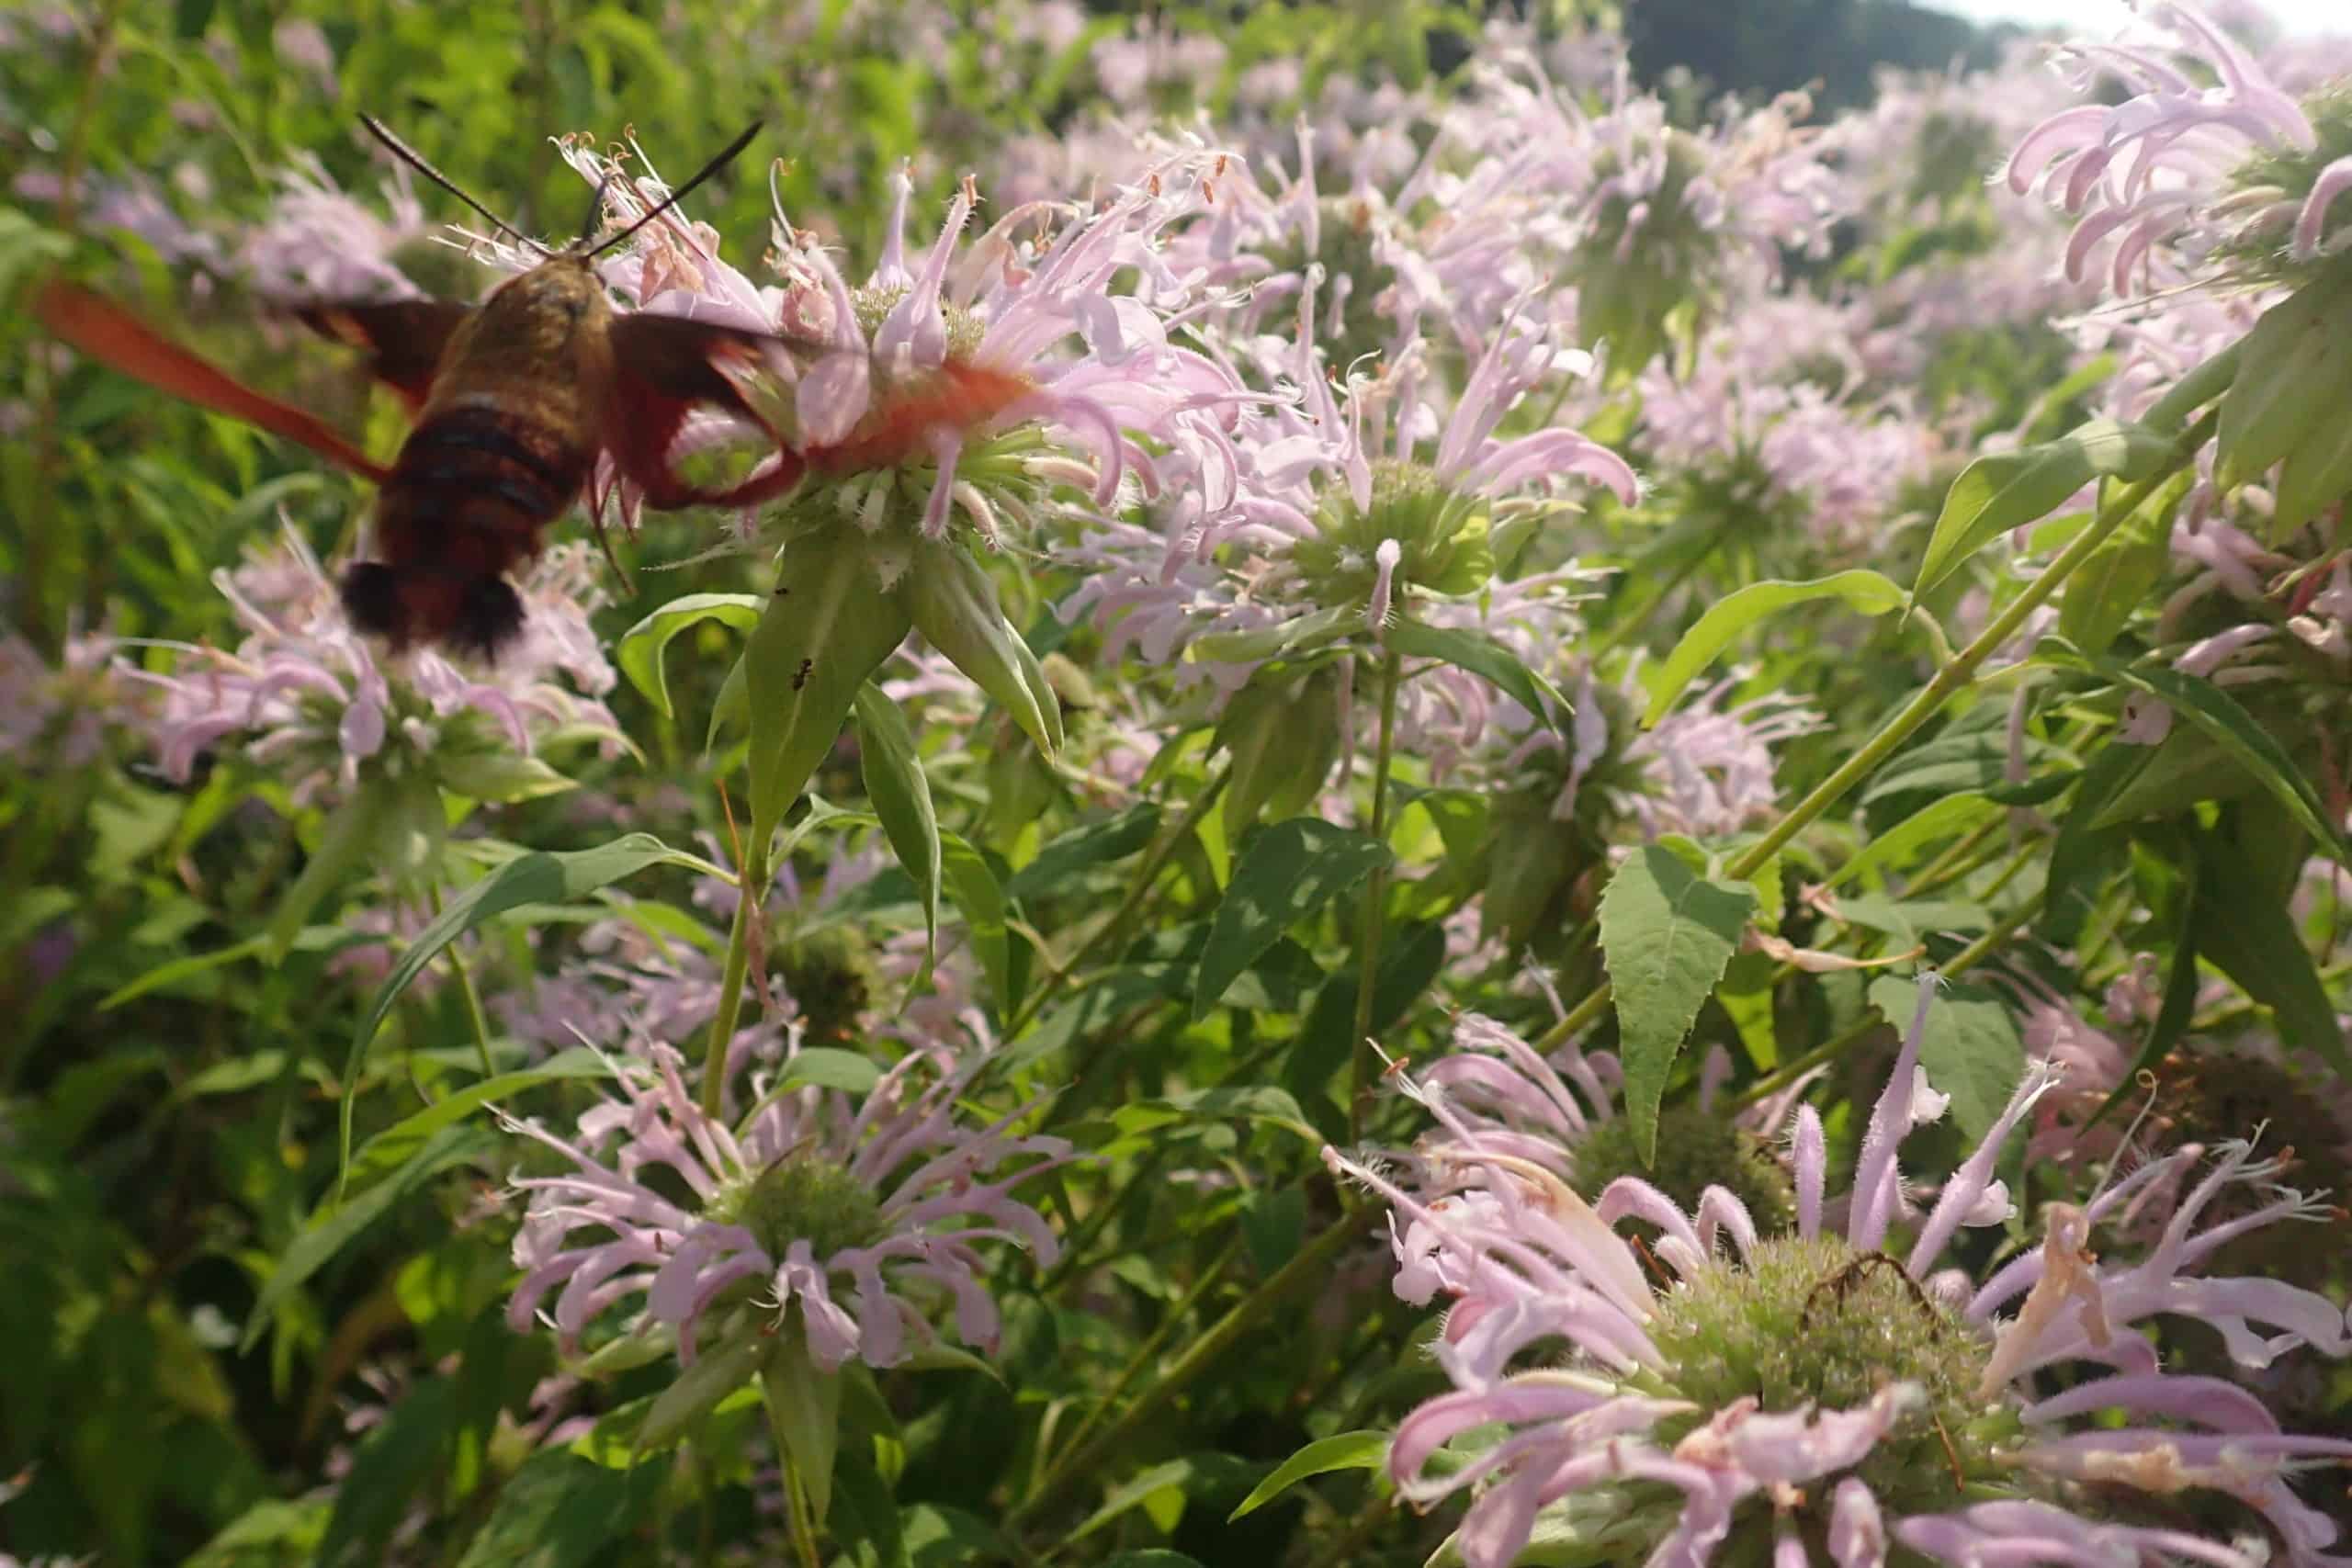 Clear-winged hawk moth hovering over pink bee-balm flowers